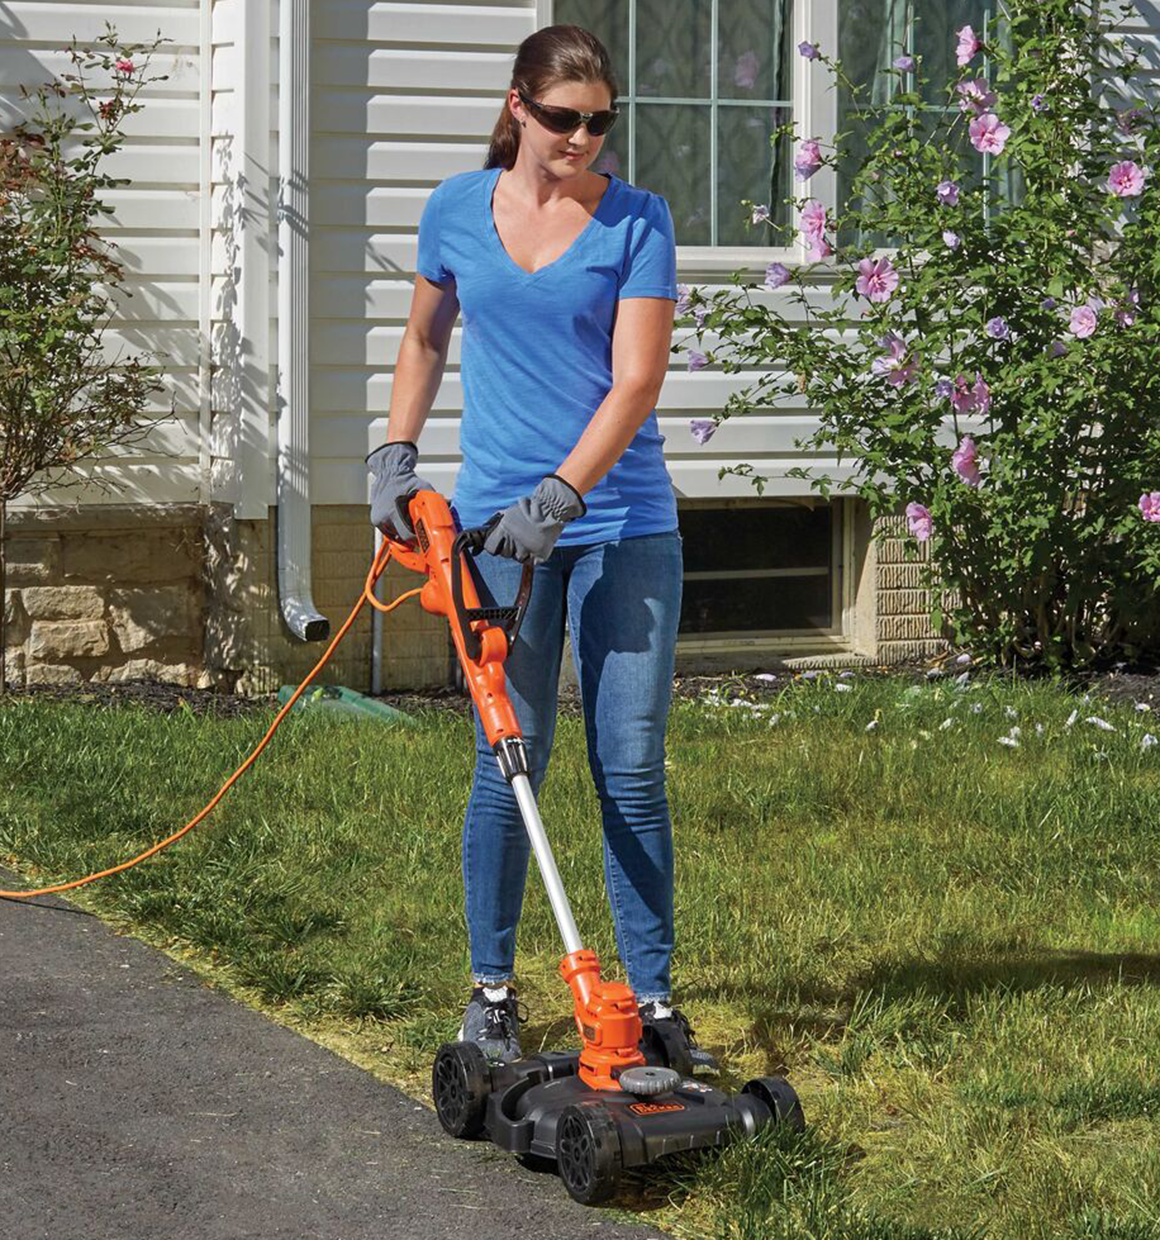 BLACK+DECKER's Electric Corded Mower doubles as an edger/trimmer, now $59  (2021 low)